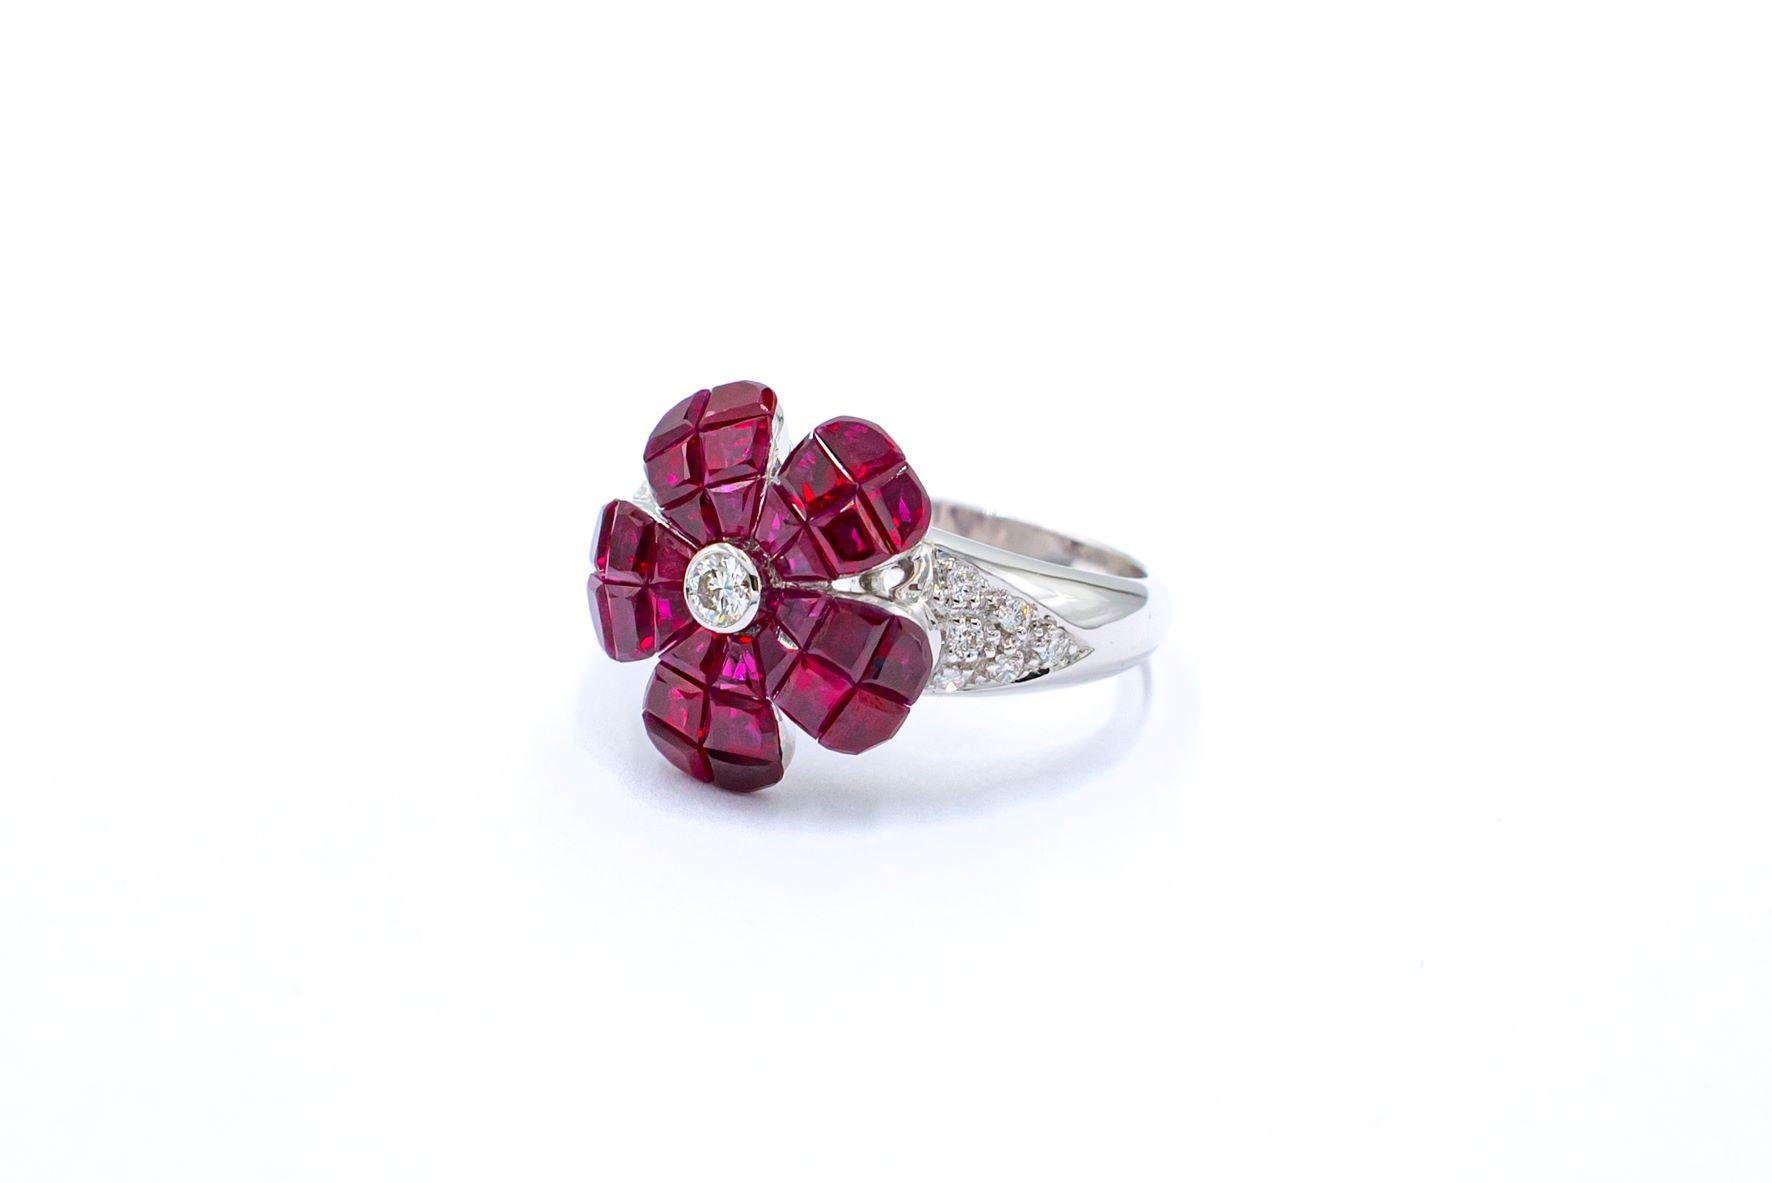 Vintage Estate Ruby and Diamond Ring